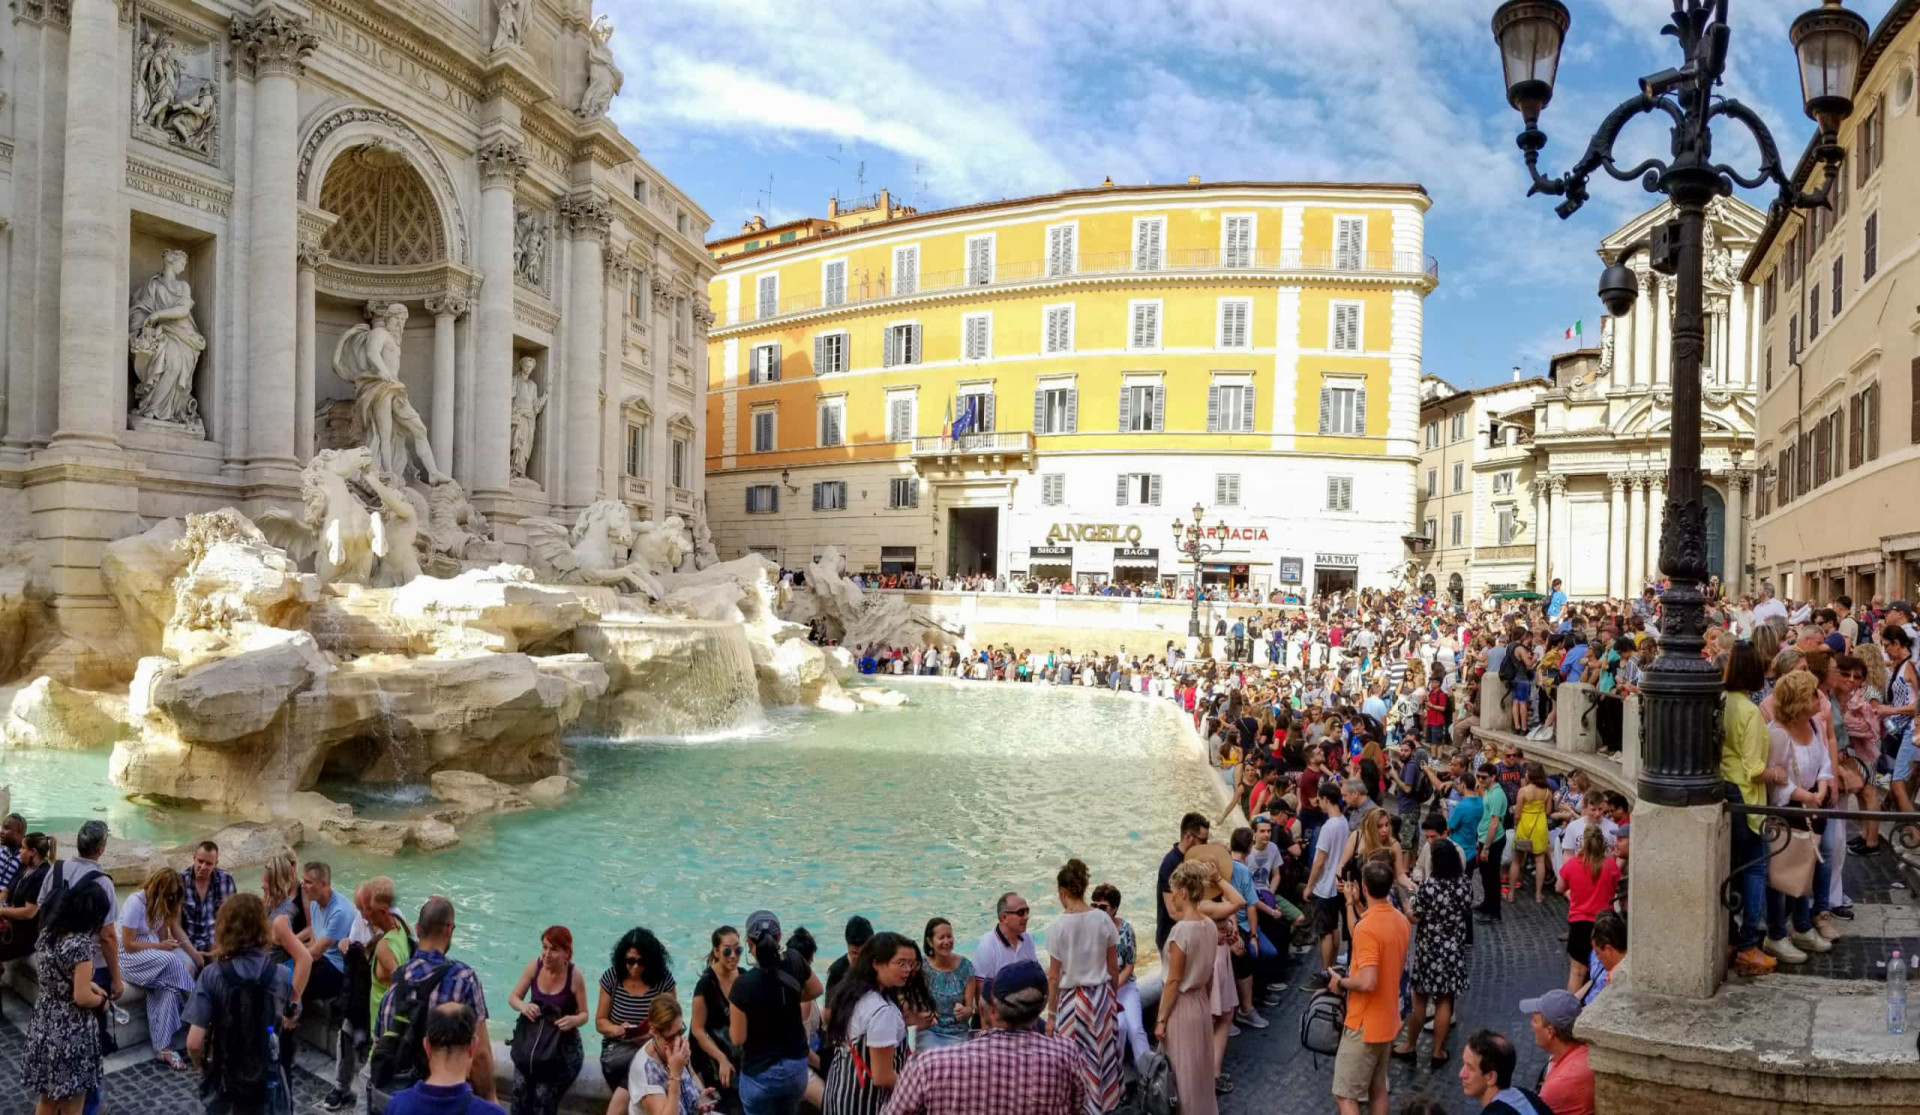 <p>Tourists in Rome have been banned from stopping at the city's baroque masterpiece, the Trevi Fountain. This is mainly due to a rise in illegal swimming incidents. Tourists can now only visit by passing through a one-way route that is supervised.</p><p>You may also like:<a href="https://www.starsinsider.com/n/367065?utm_source=msn.com&utm_medium=display&utm_campaign=referral_description&utm_content=668561en-my"> The brainiest star signs based on Nobel Prize winners</a></p>